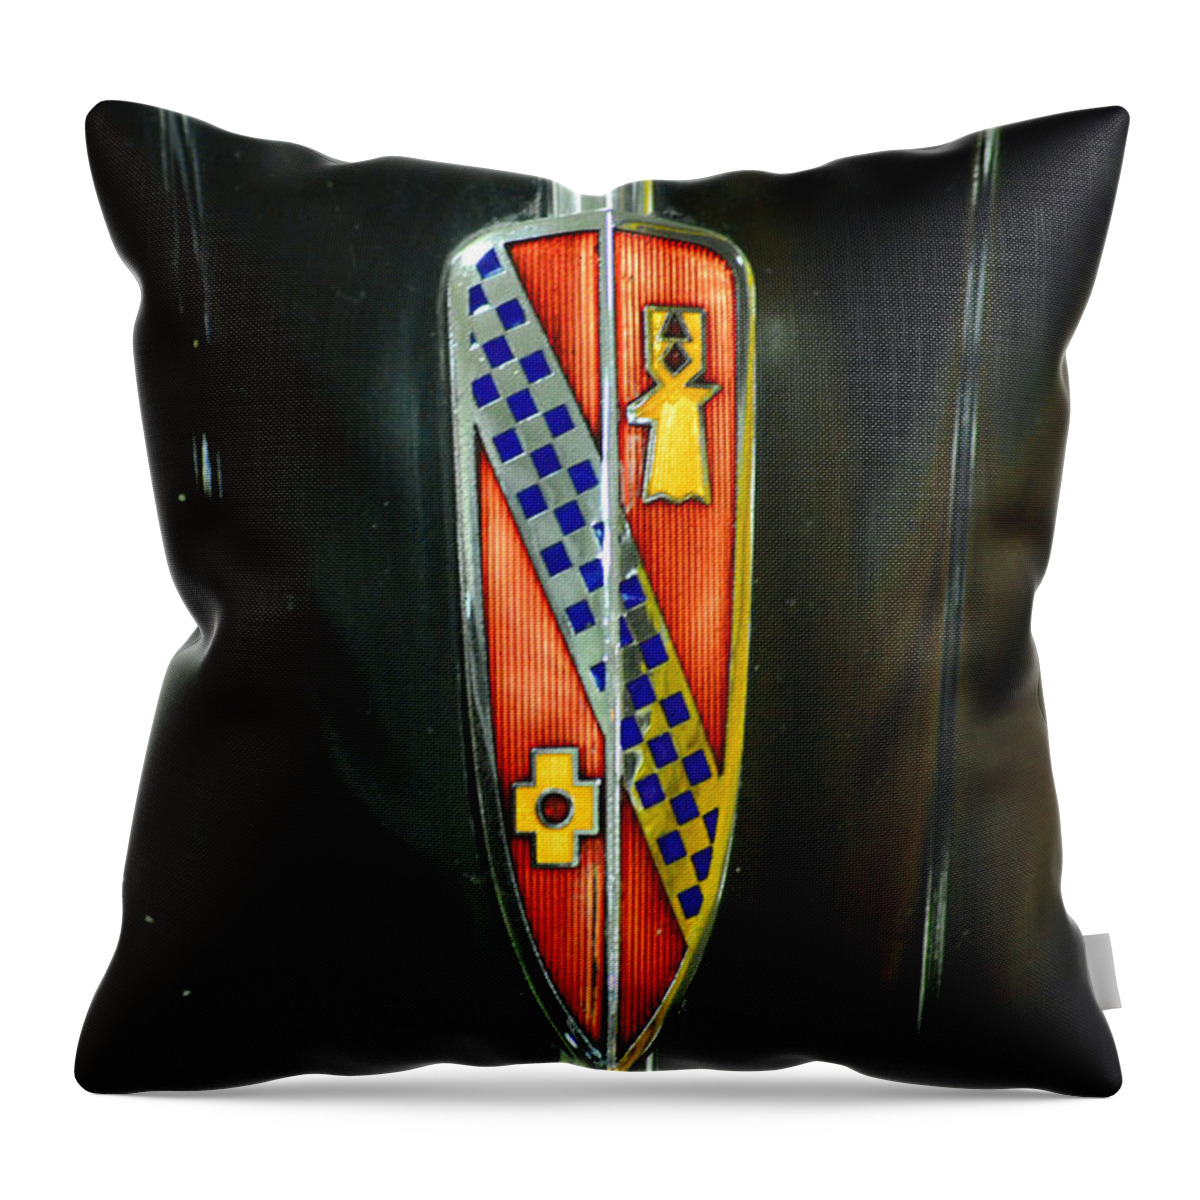 Vintage Automobiles Throw Pillow featuring the photograph Up Front by Newel Hunter